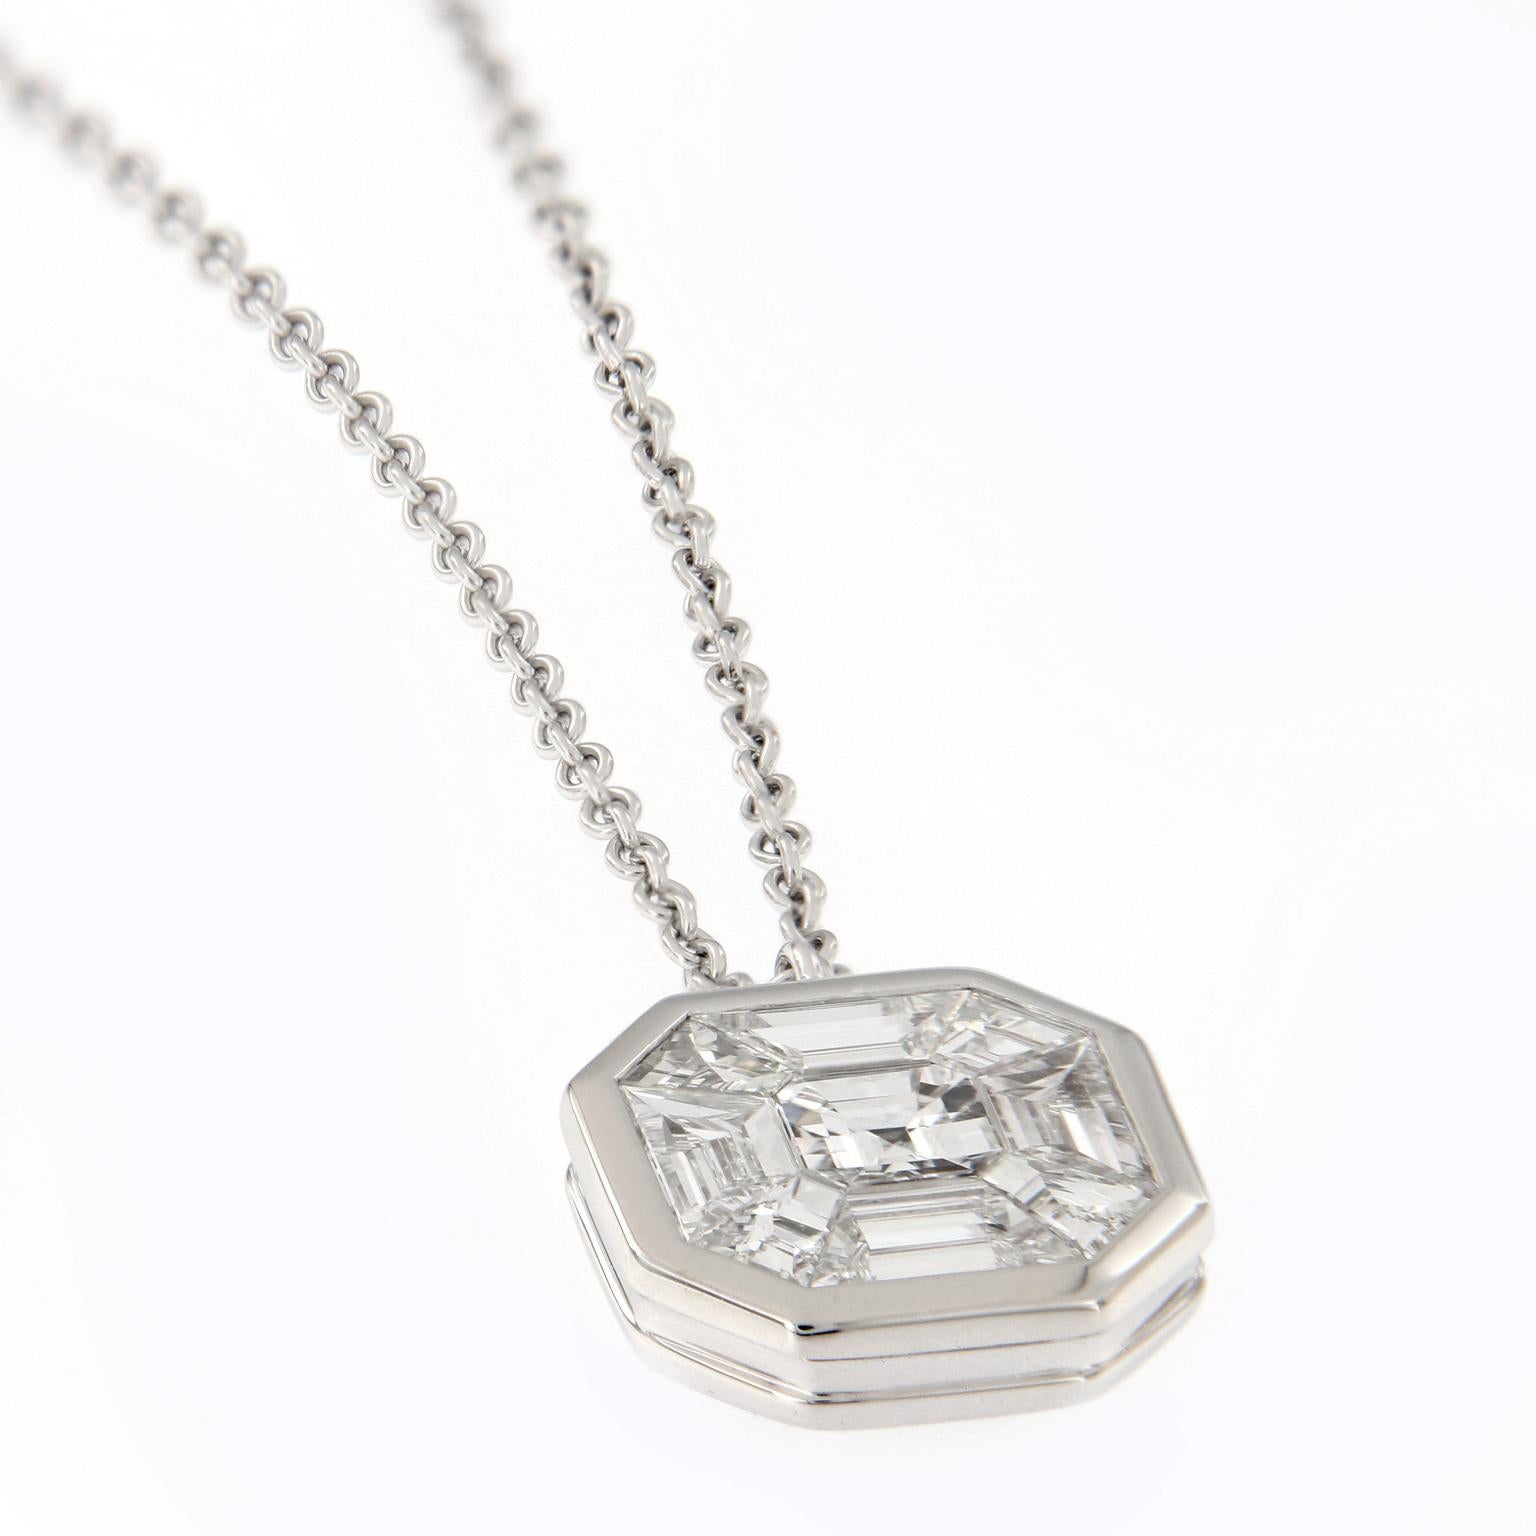 Elegantly fashioned pendant features a 1.05 carat asscher cut diamond, invisiable set in 18k white gold. Pendant hangs from an adjustable 18k white gold chain. The Pendant is 10.6 mm diameter. Weighs 5.2 grams.